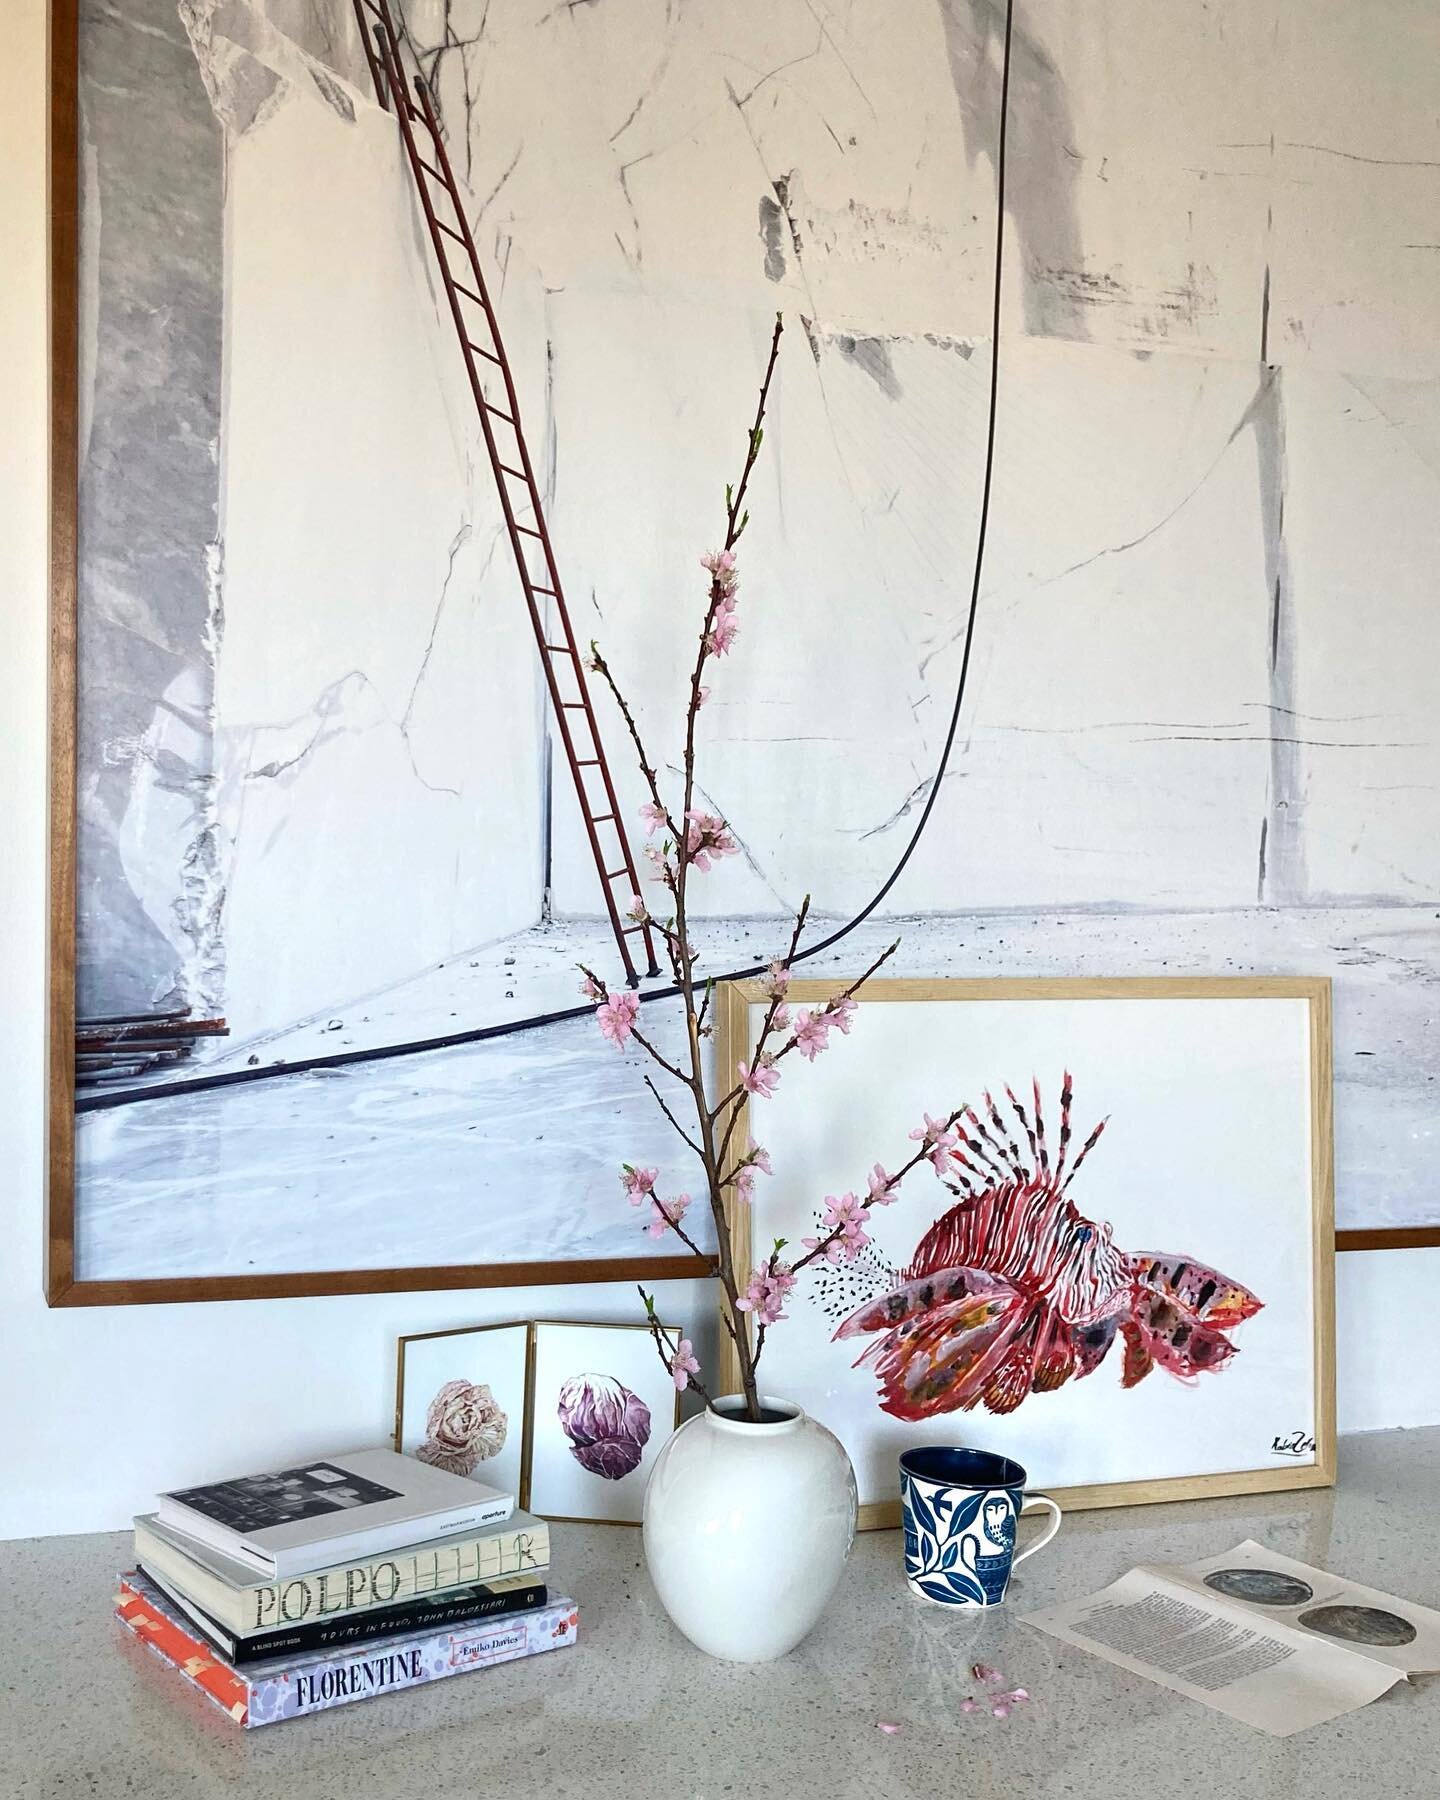 Accidental kitchen color coordination and a few favorite things &hellip; culinary travel escapes by way of @emikodavies&rsquo; #Florentinethecookbook + #polpocookbook &hellip; @mollyreeder&rsquo;s radicchio watercolor renderings &hellip; a spring twi